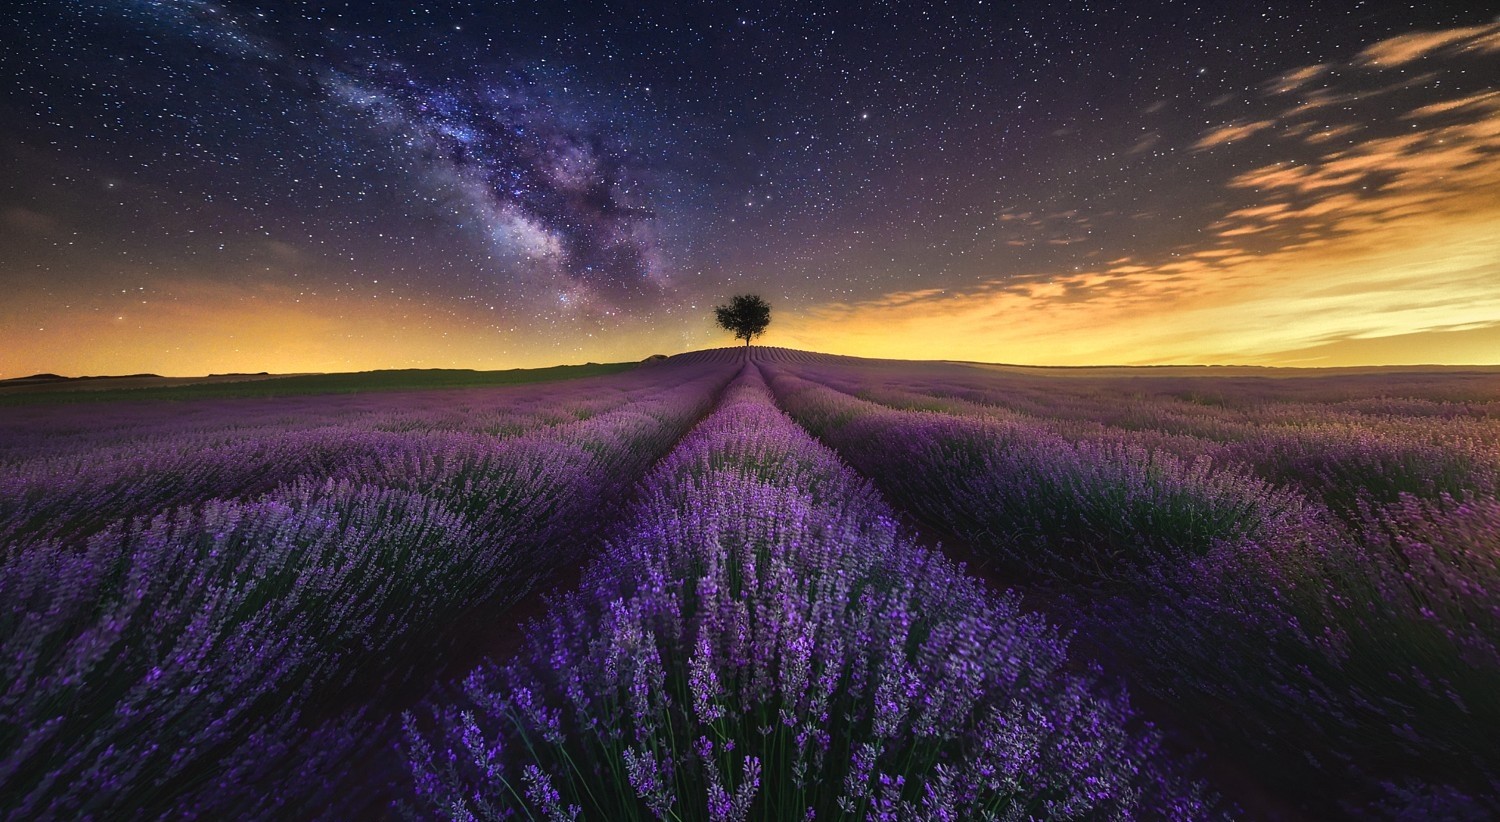 General 1500x822 photography landscape nature lavender field flowers starry night Milky Way trees long exposure lights clouds stars sky Agro (Plants) outdoors